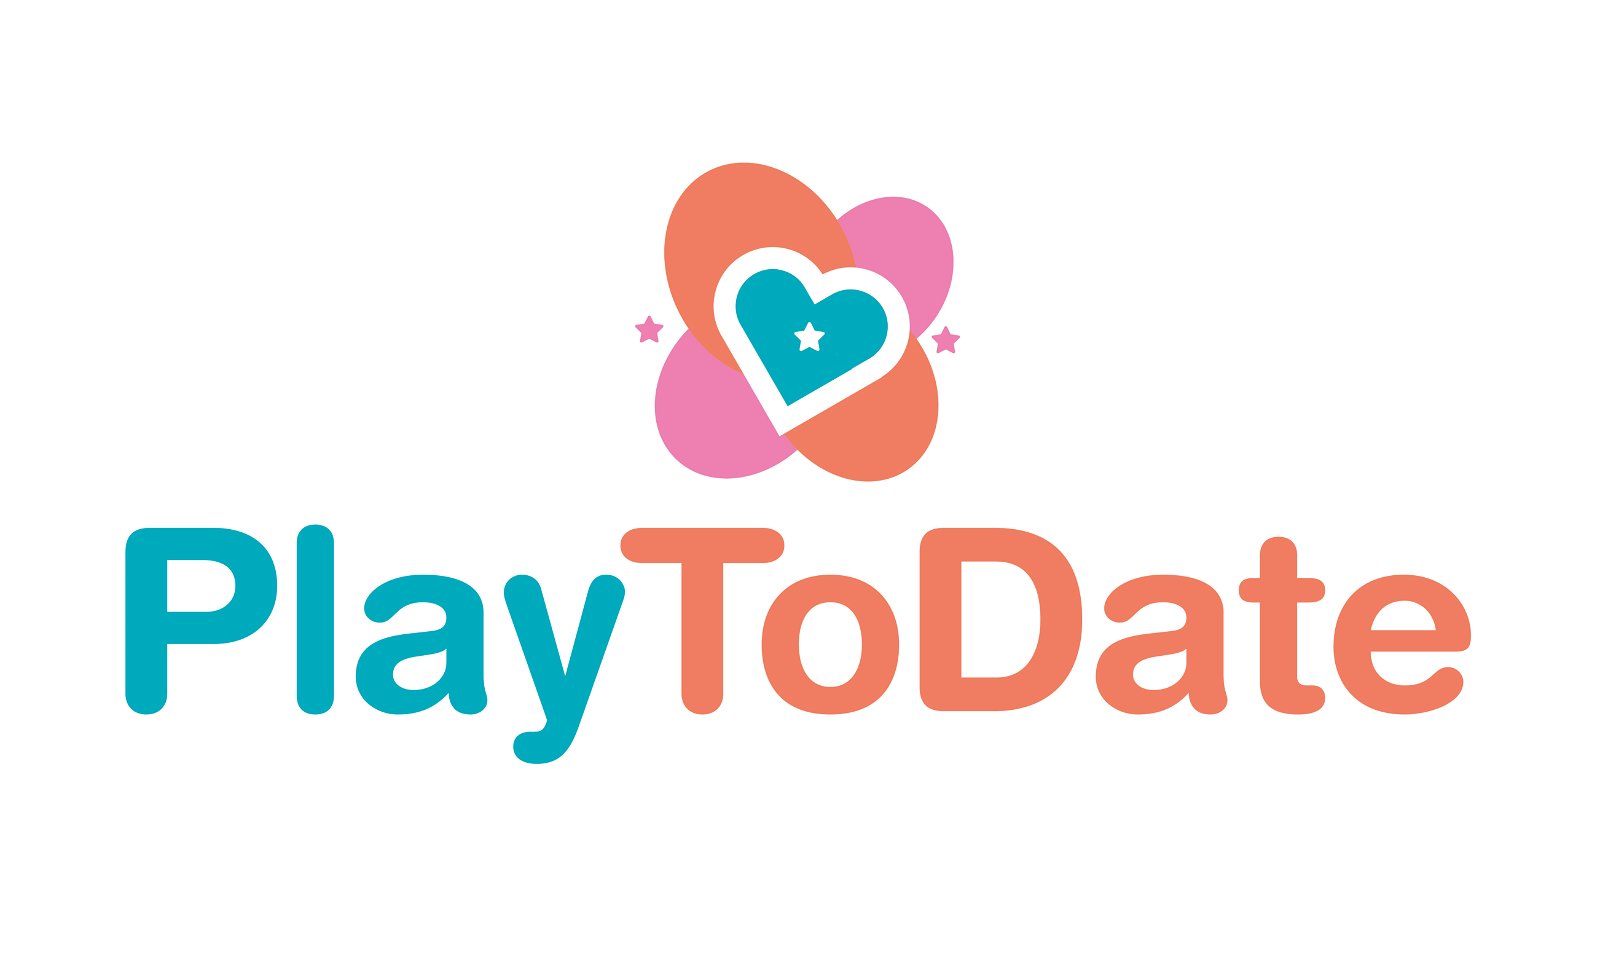 PlayToDate.com - Creative brandable domain for sale